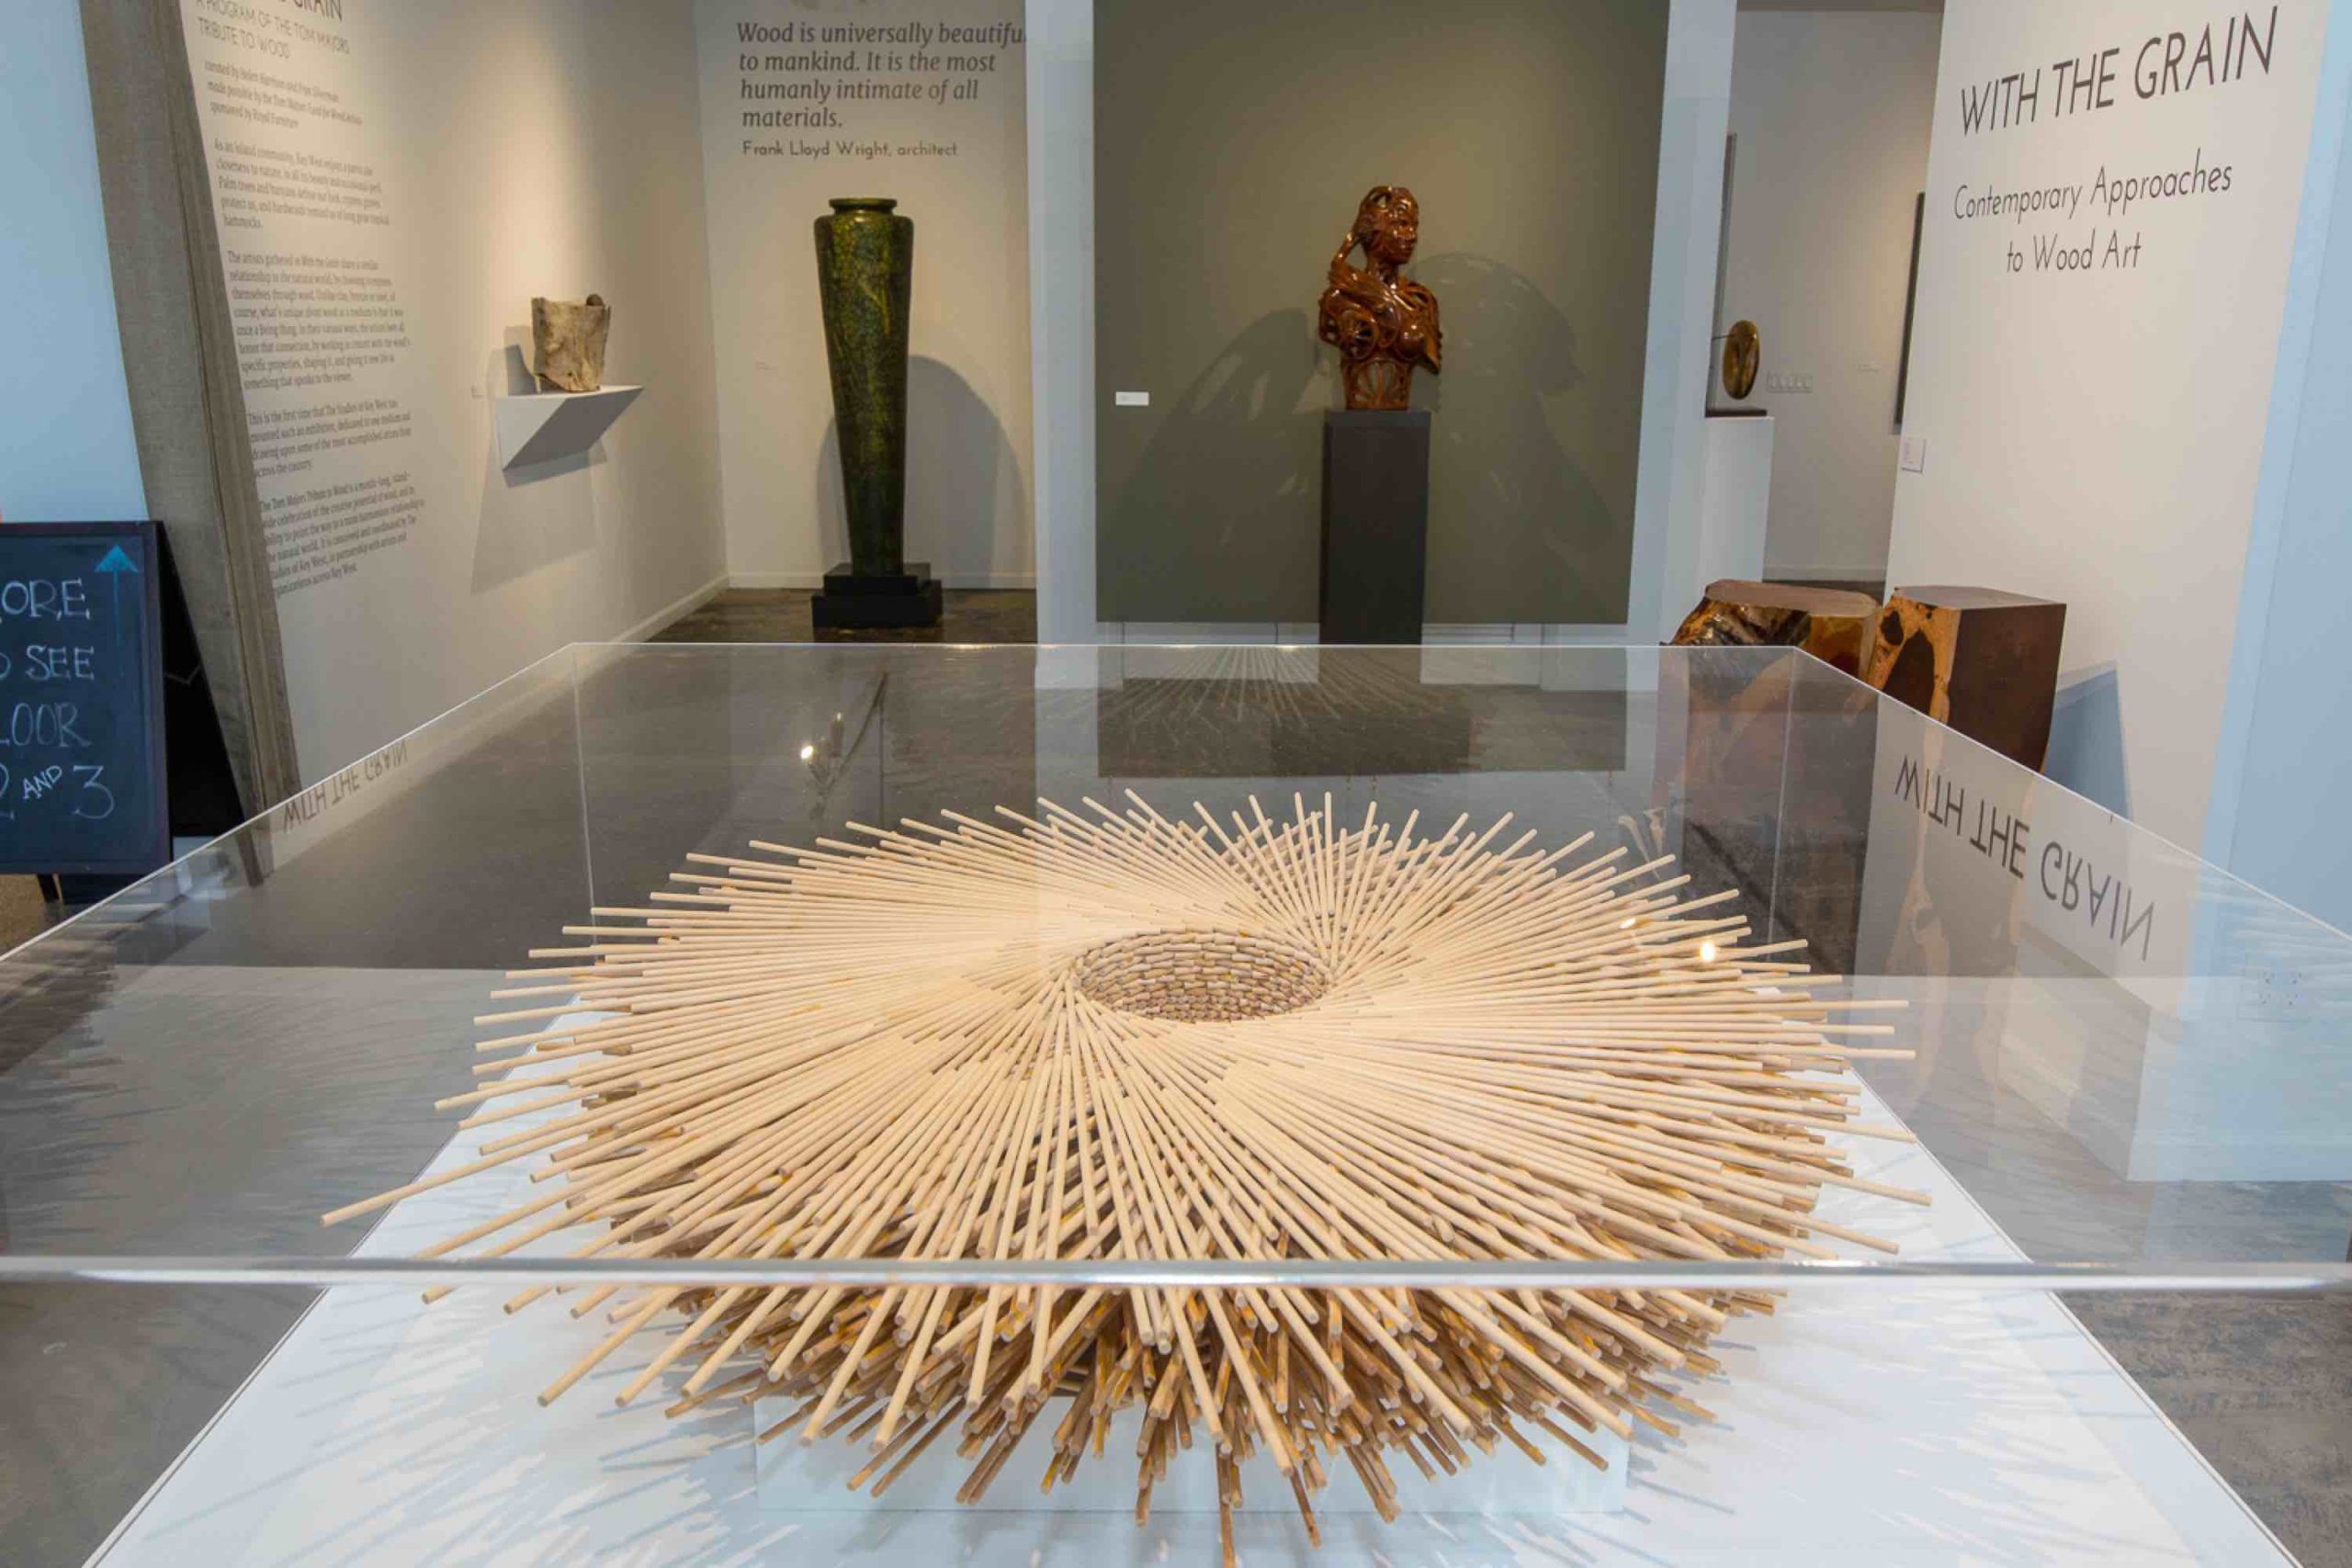 Photograph of the Gallery during the With the Grain exhibition with wood sculptures